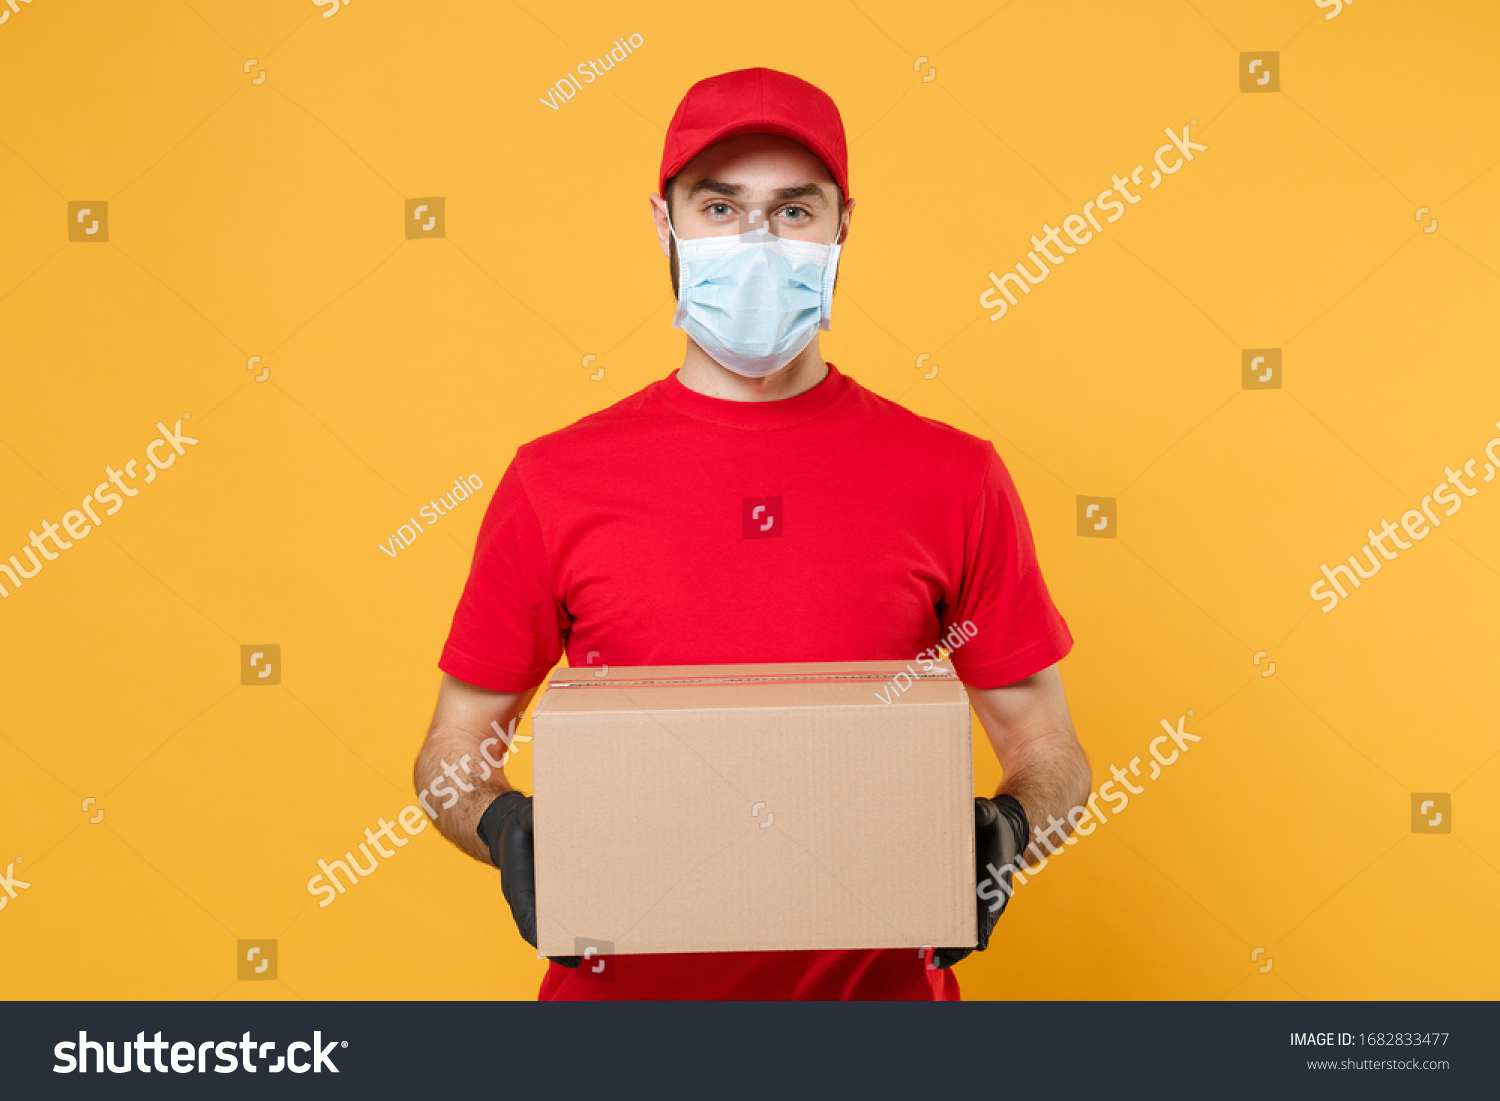 Delivery man employee in red cap blank t-shirt uniform face mask gloves hold empty cardboard box isolated on yellow background studio Service quarantine pandemic coronavirus virus 2019-ncov concept #1682833477